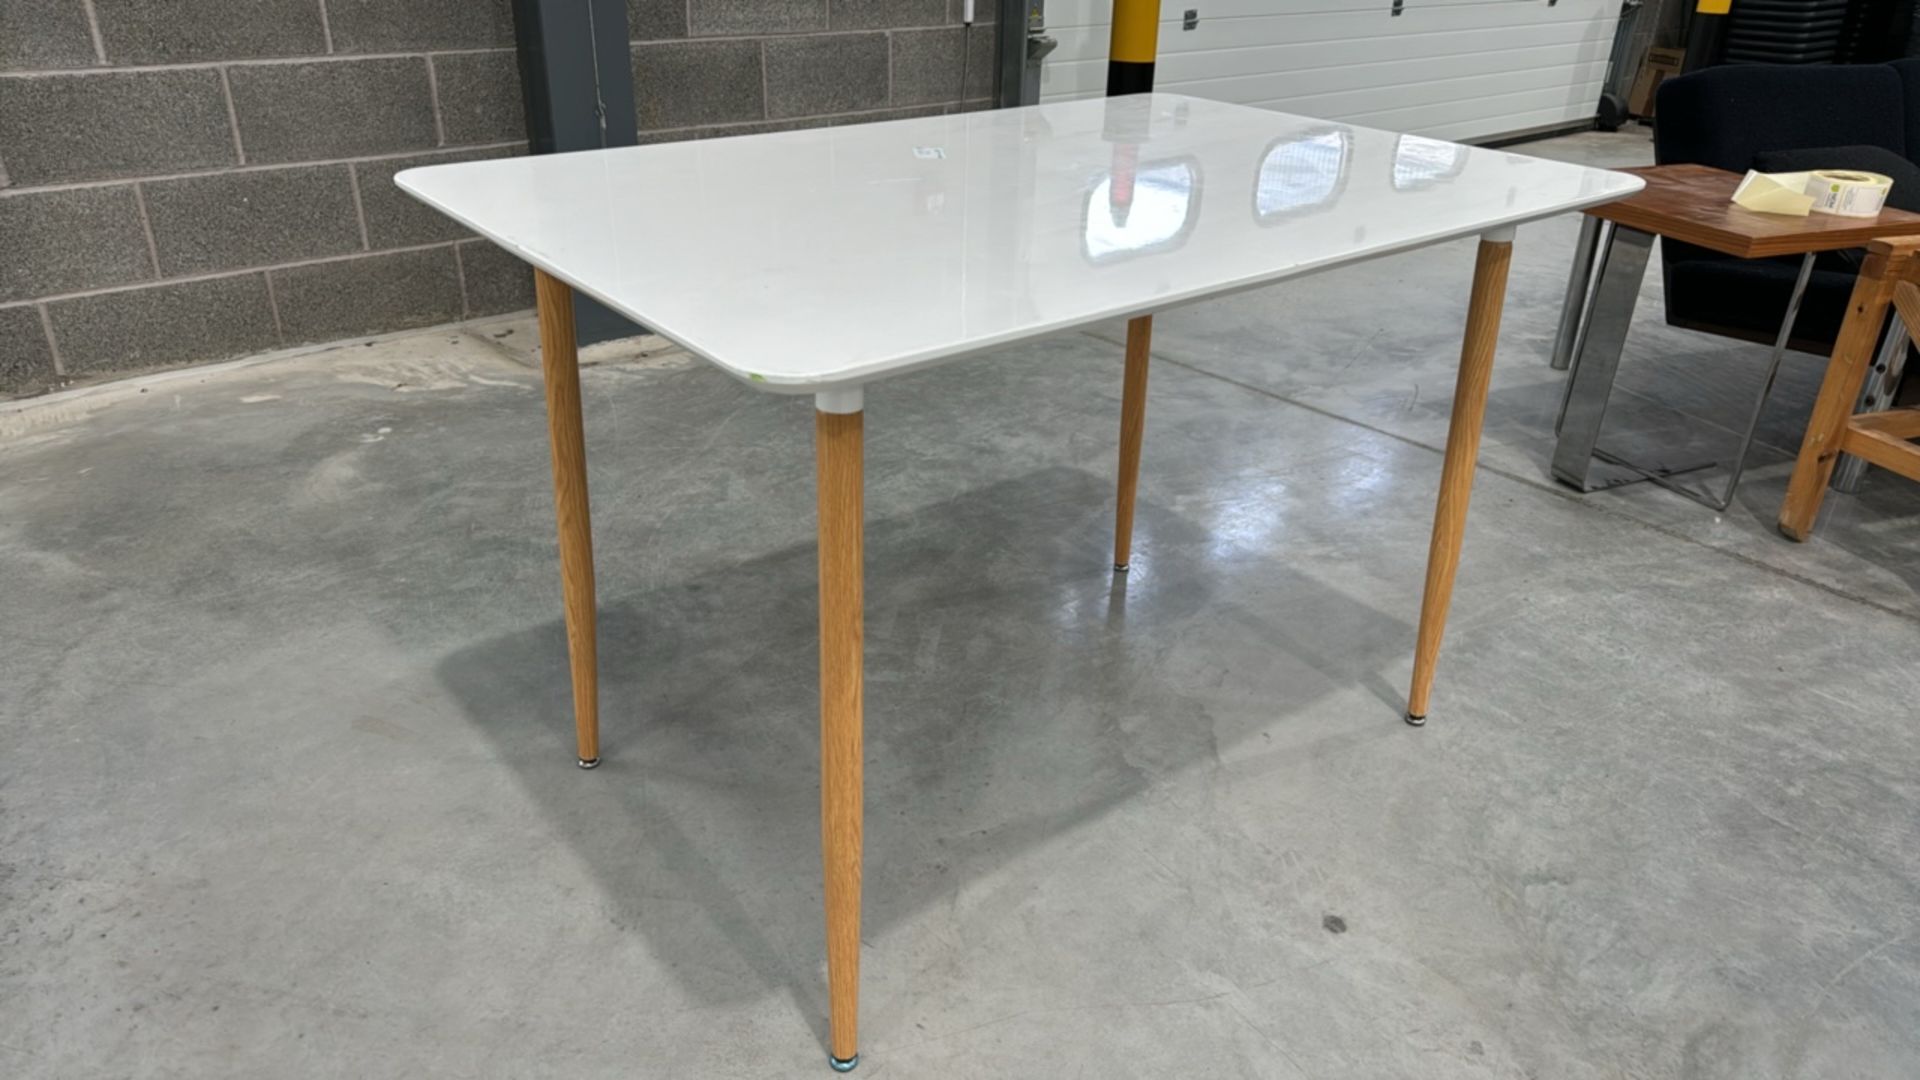 White Gloss Table With Wooden Legs - Image 2 of 4